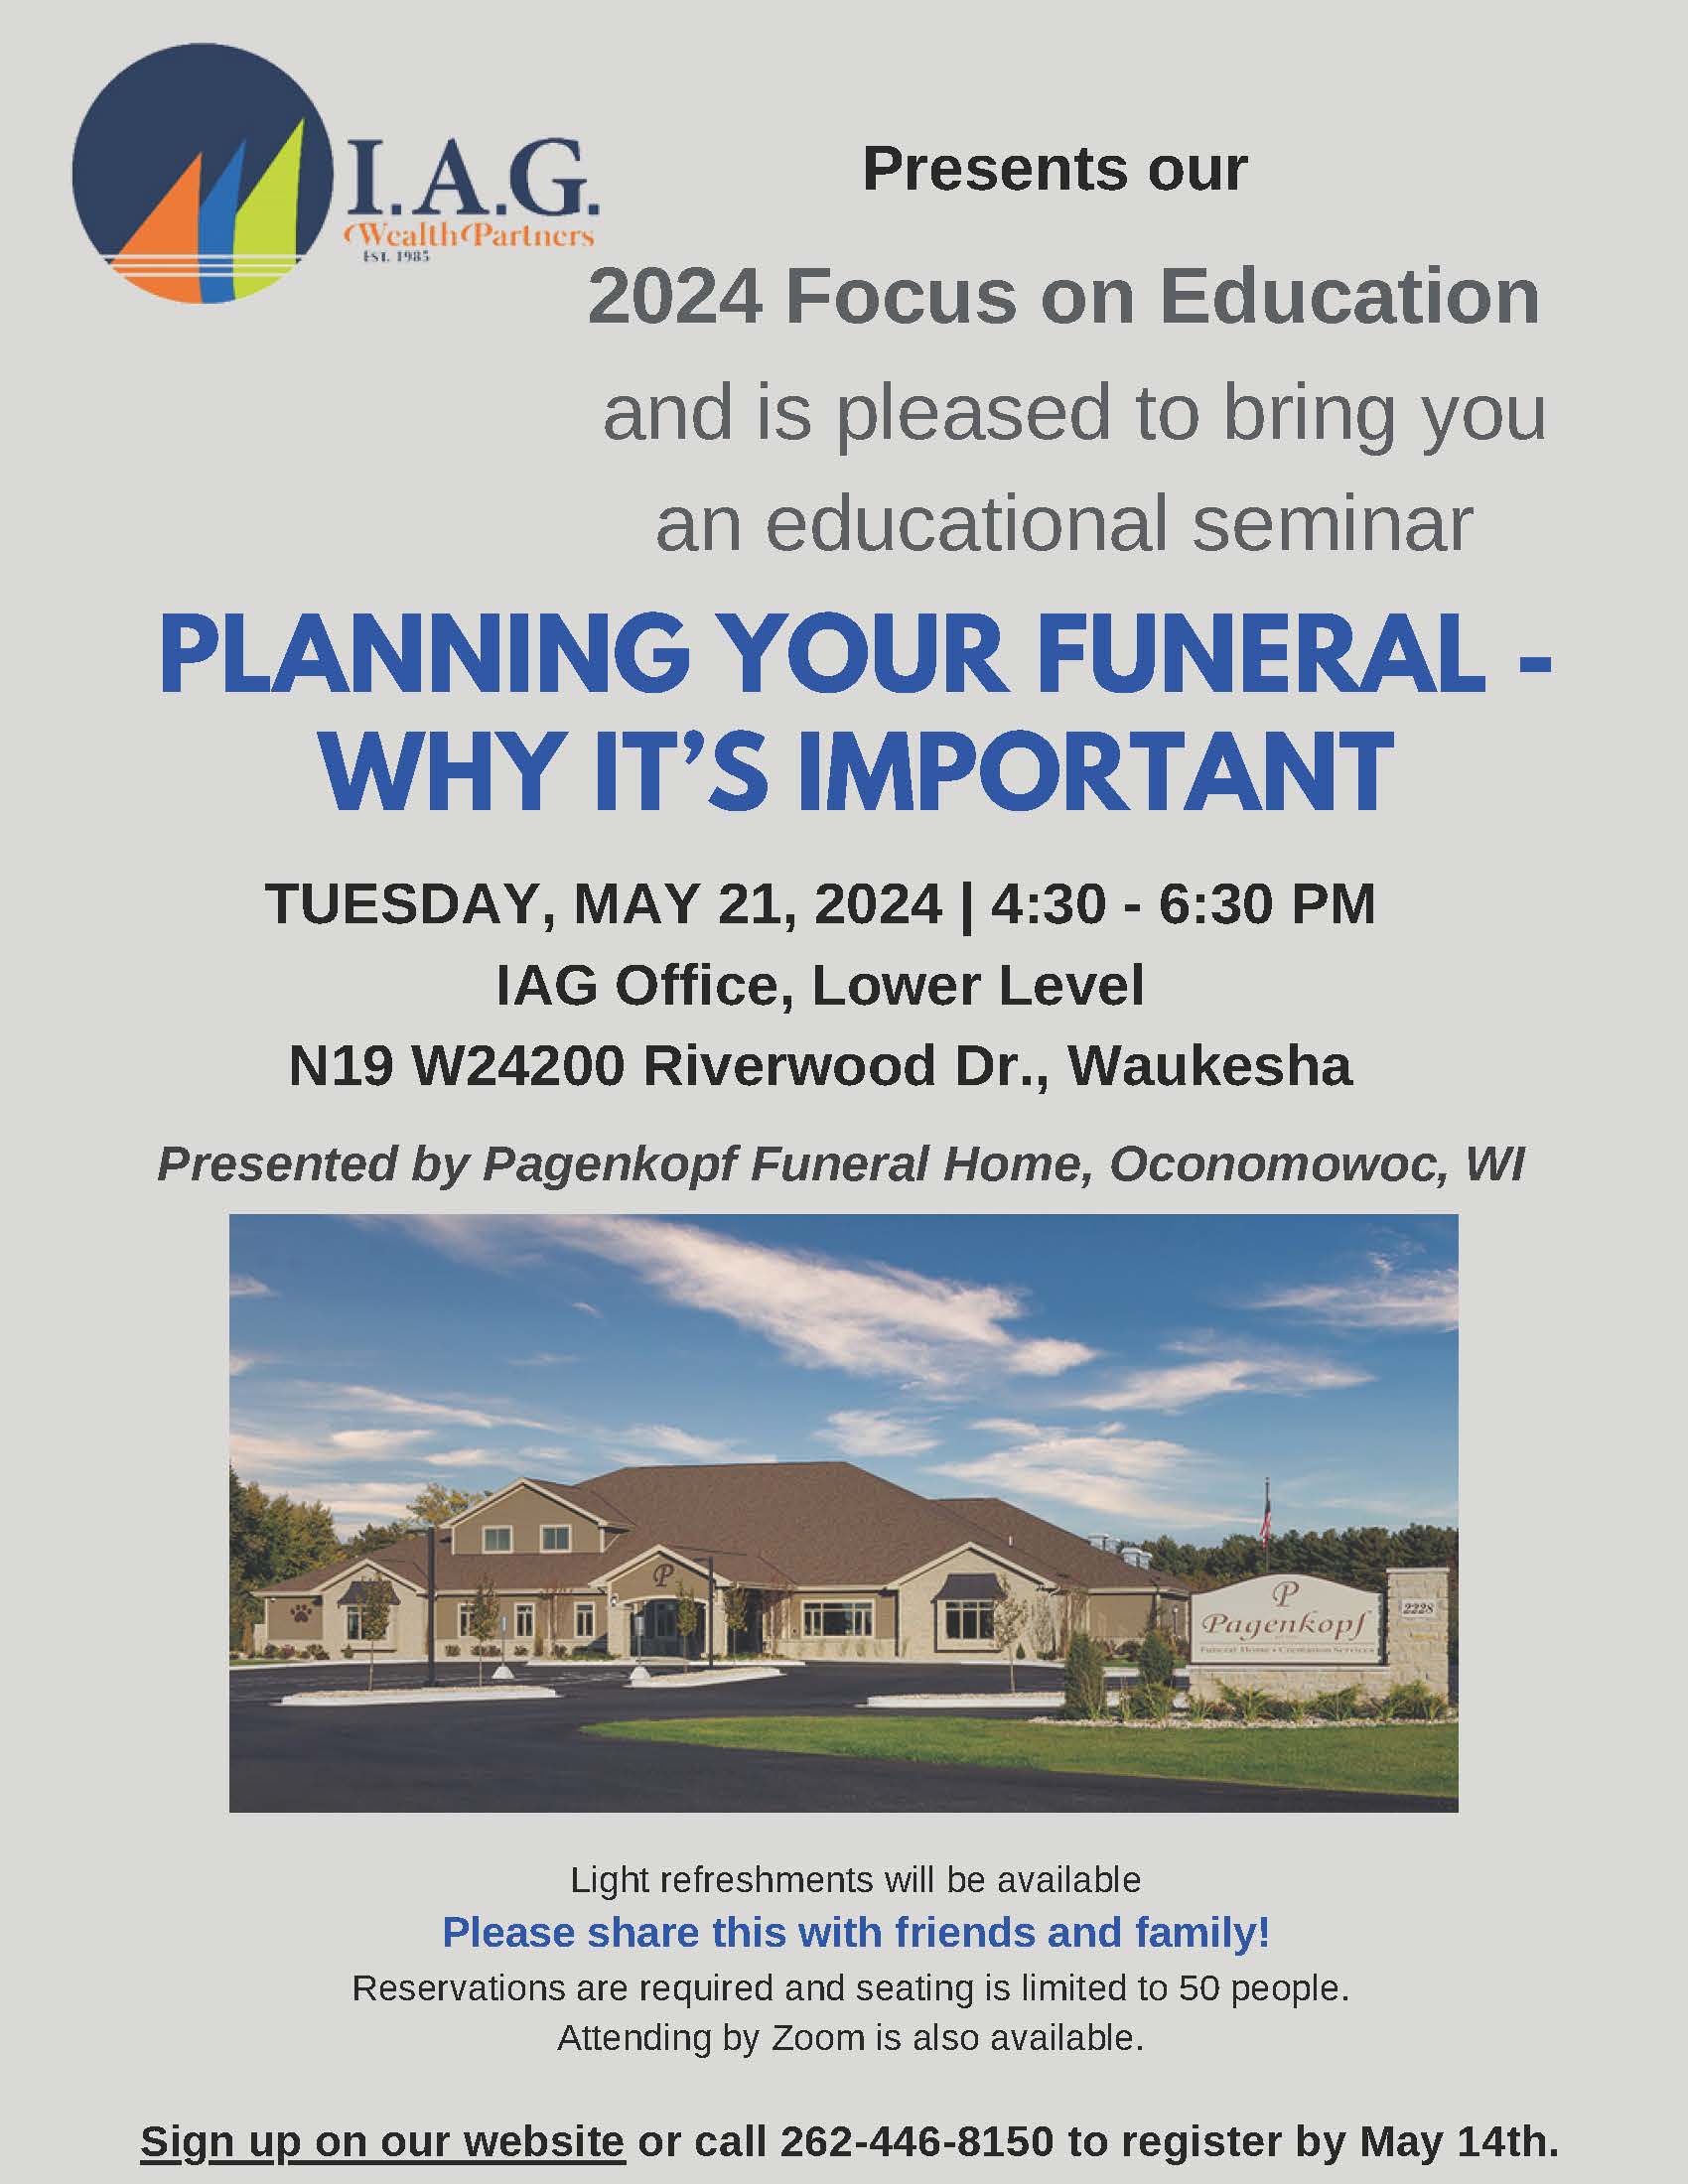 Funeral Planning - Why It's Important